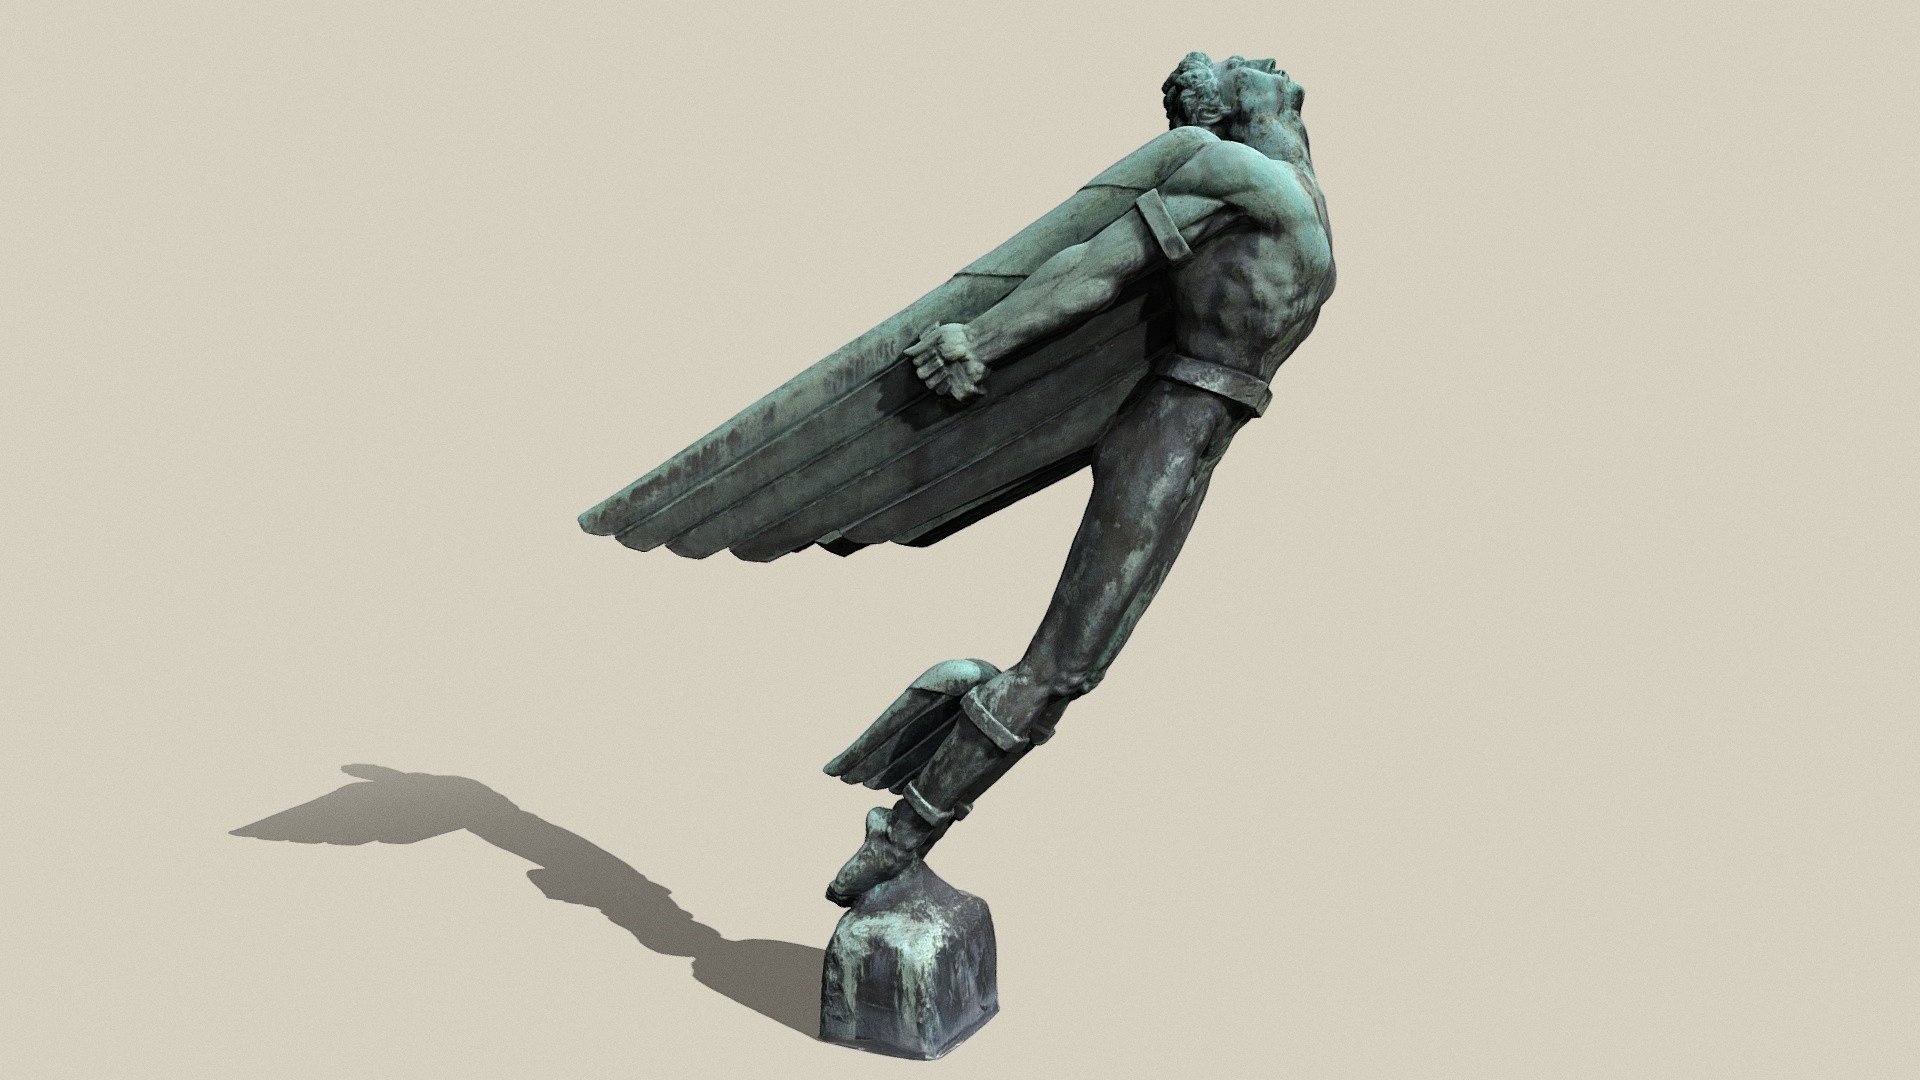 Bronze figure of Icarus in front of the Spitzerberg Aviation Centre. 

The story of Icarus comes from Greek mythology. He and his father Daedalus were held prisoner by King Minos. The only way to escape was by air. Daedalus built wings for himself and his son out of feathers and wax to escape from captivity 3d model